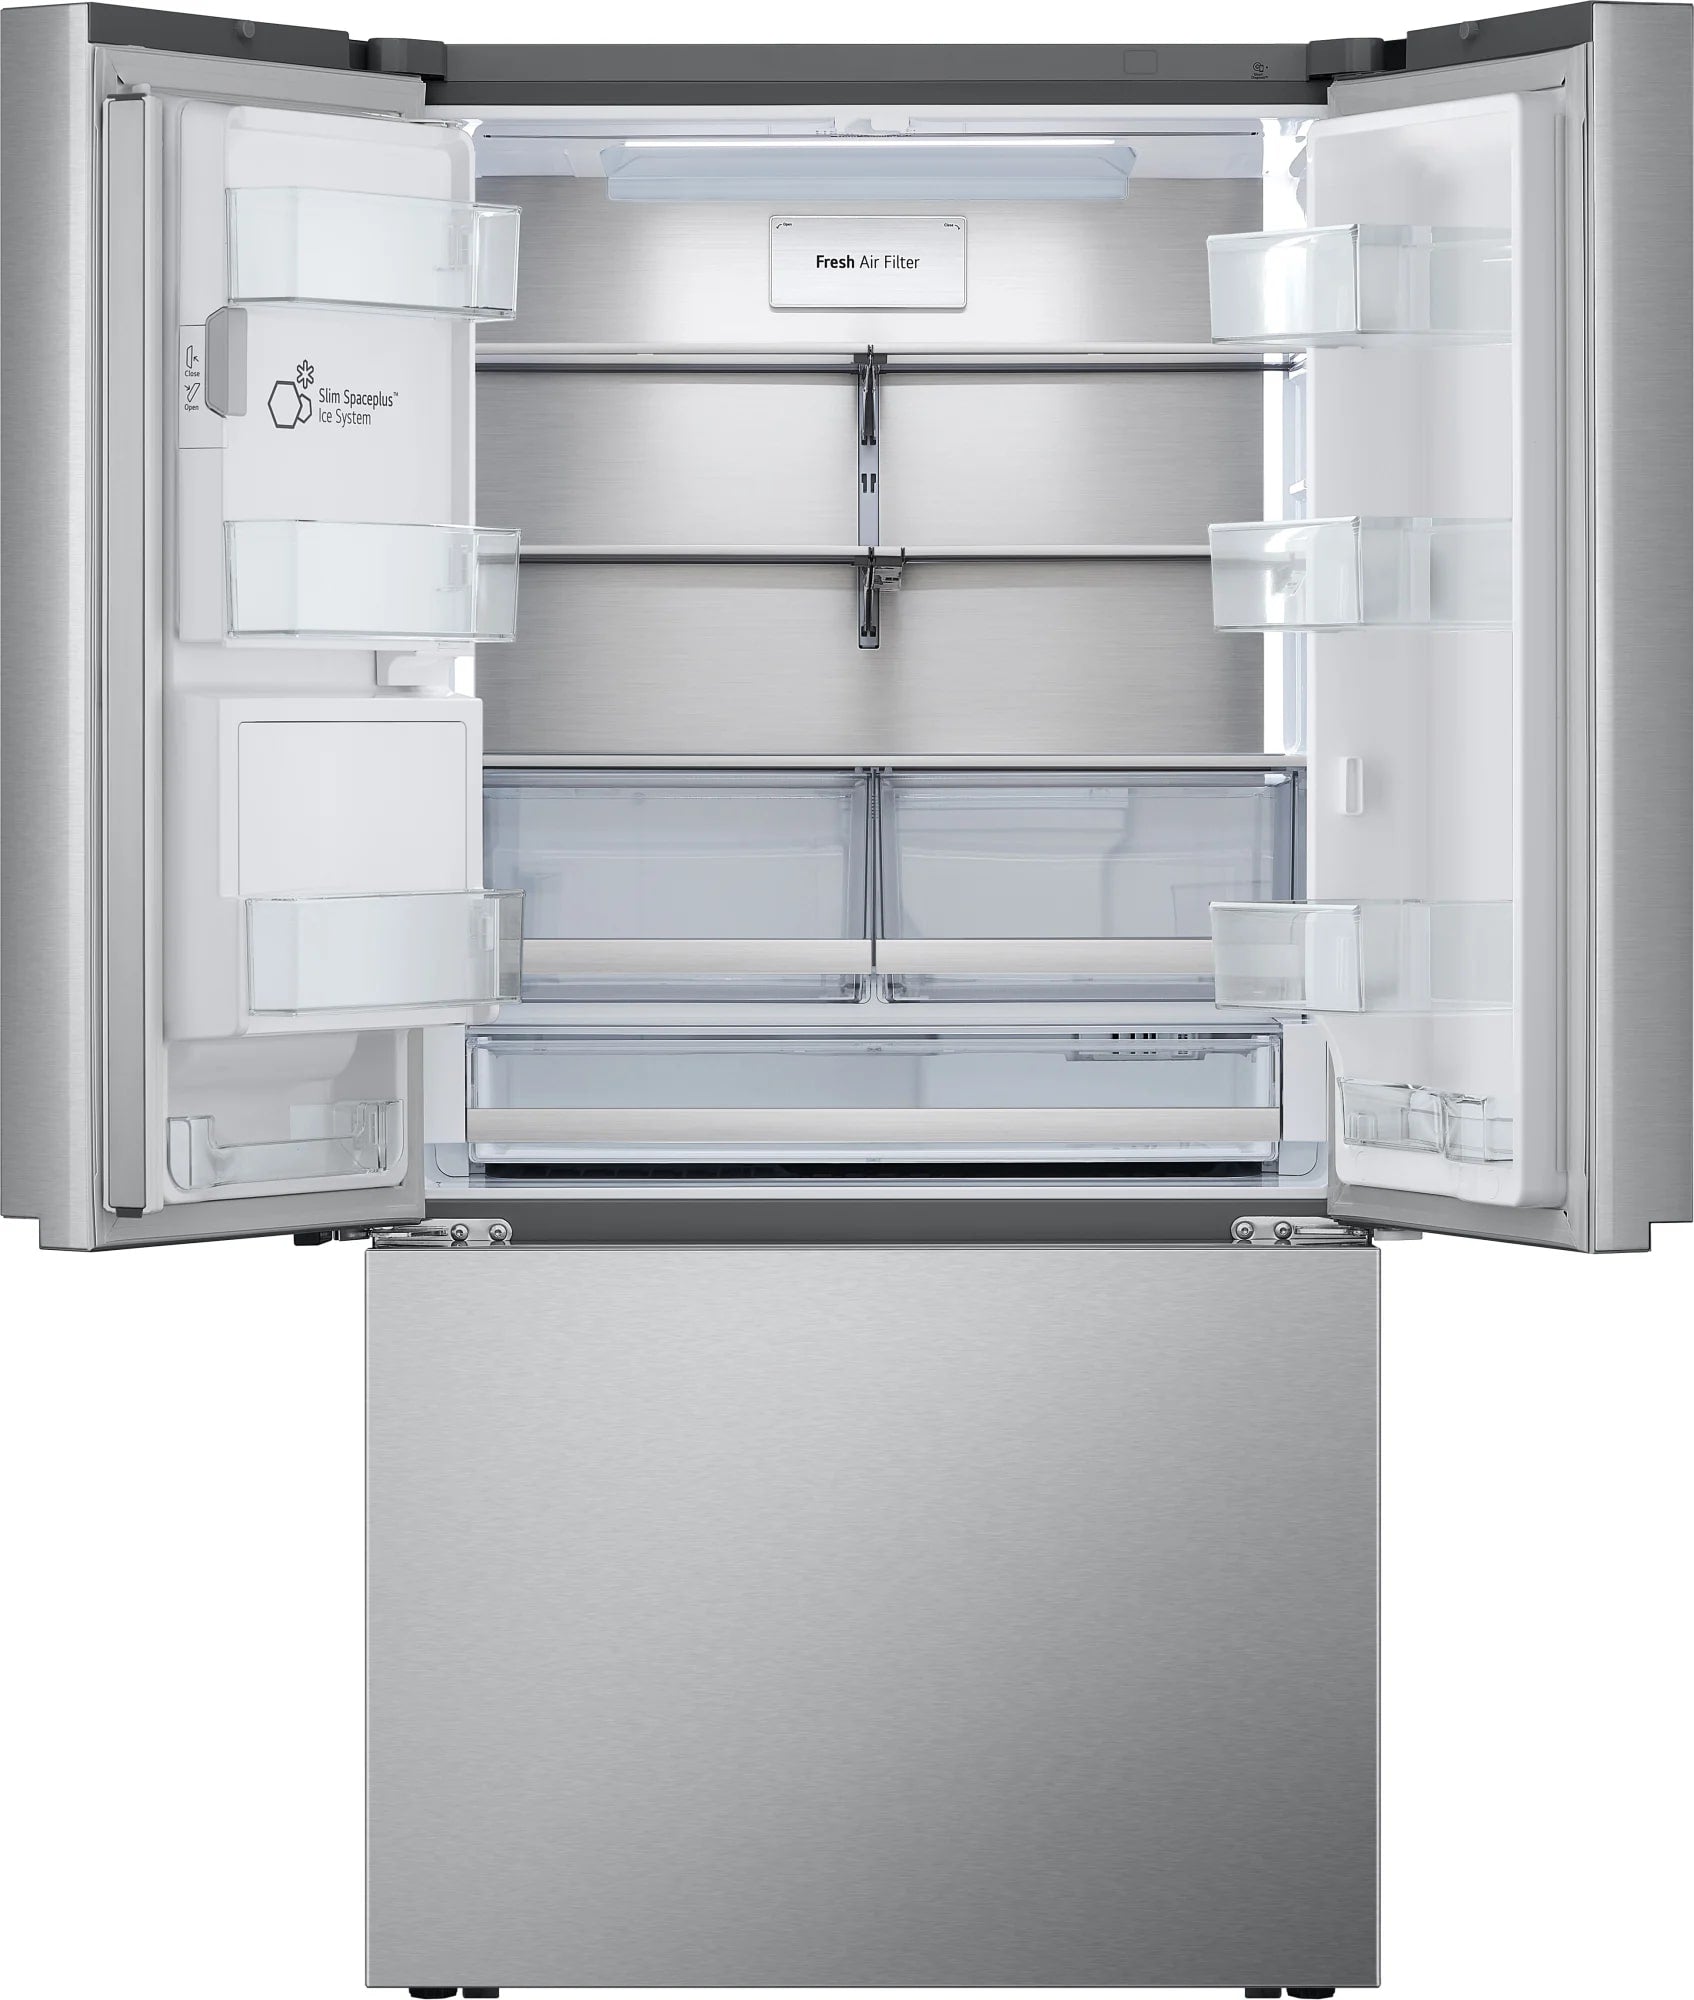 LG - 35.75 Inch 25.5 cu. ft French Door Refrigerator in Stainless - LRYXC2606S